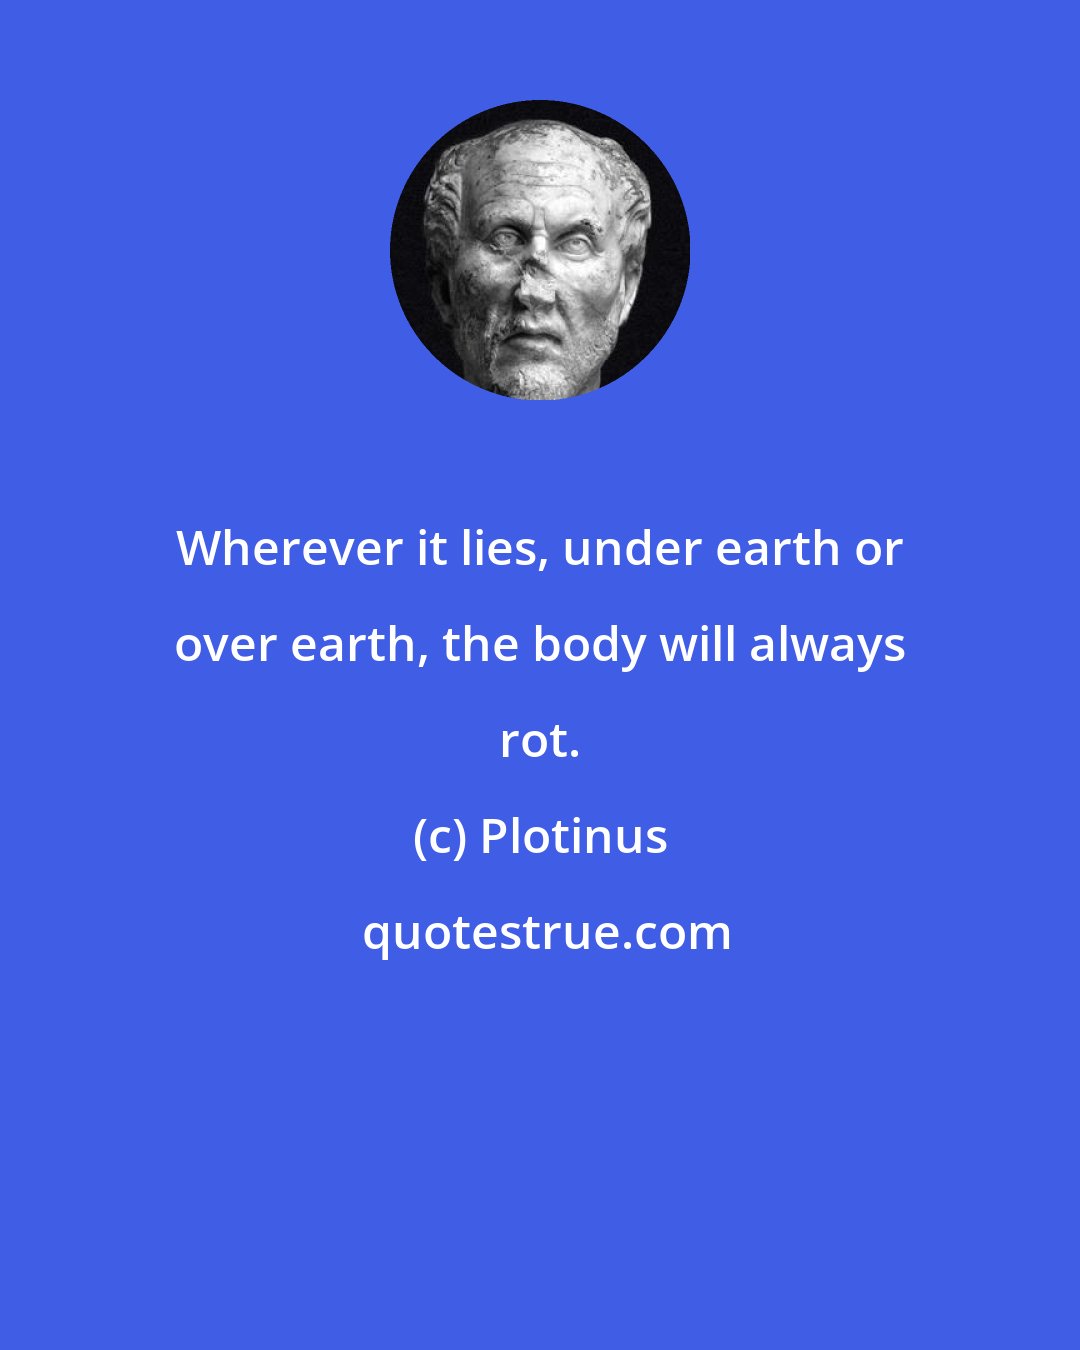 Plotinus: Wherever it lies, under earth or over earth, the body will always rot.